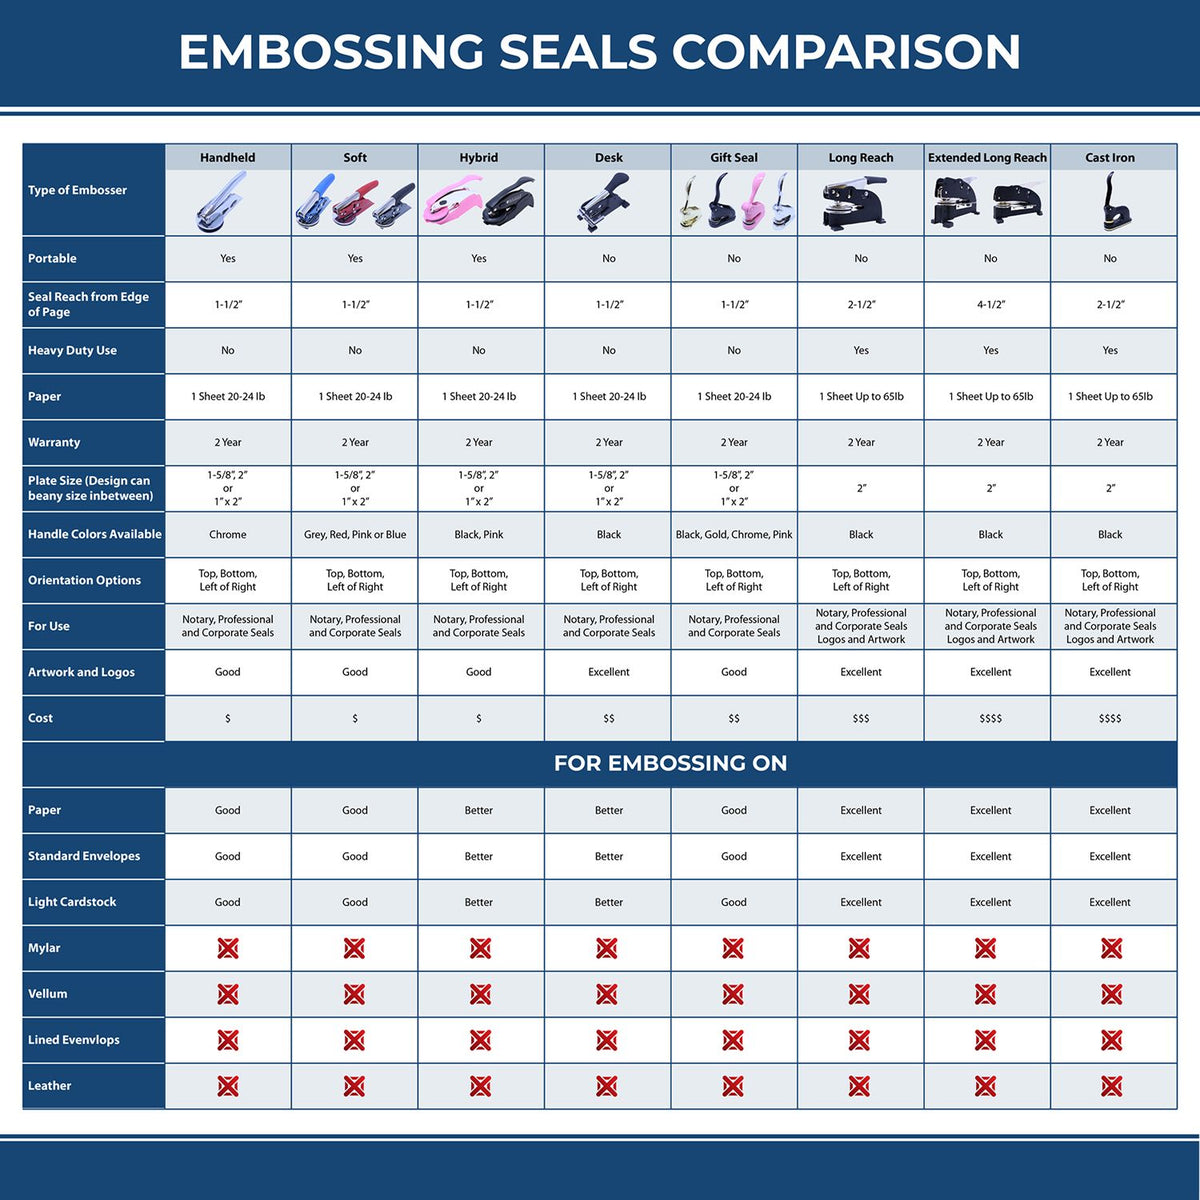 A comparison chart for the different types of mount models available for the State of Rhode Island Long Reach Architectural Embossing Seal.